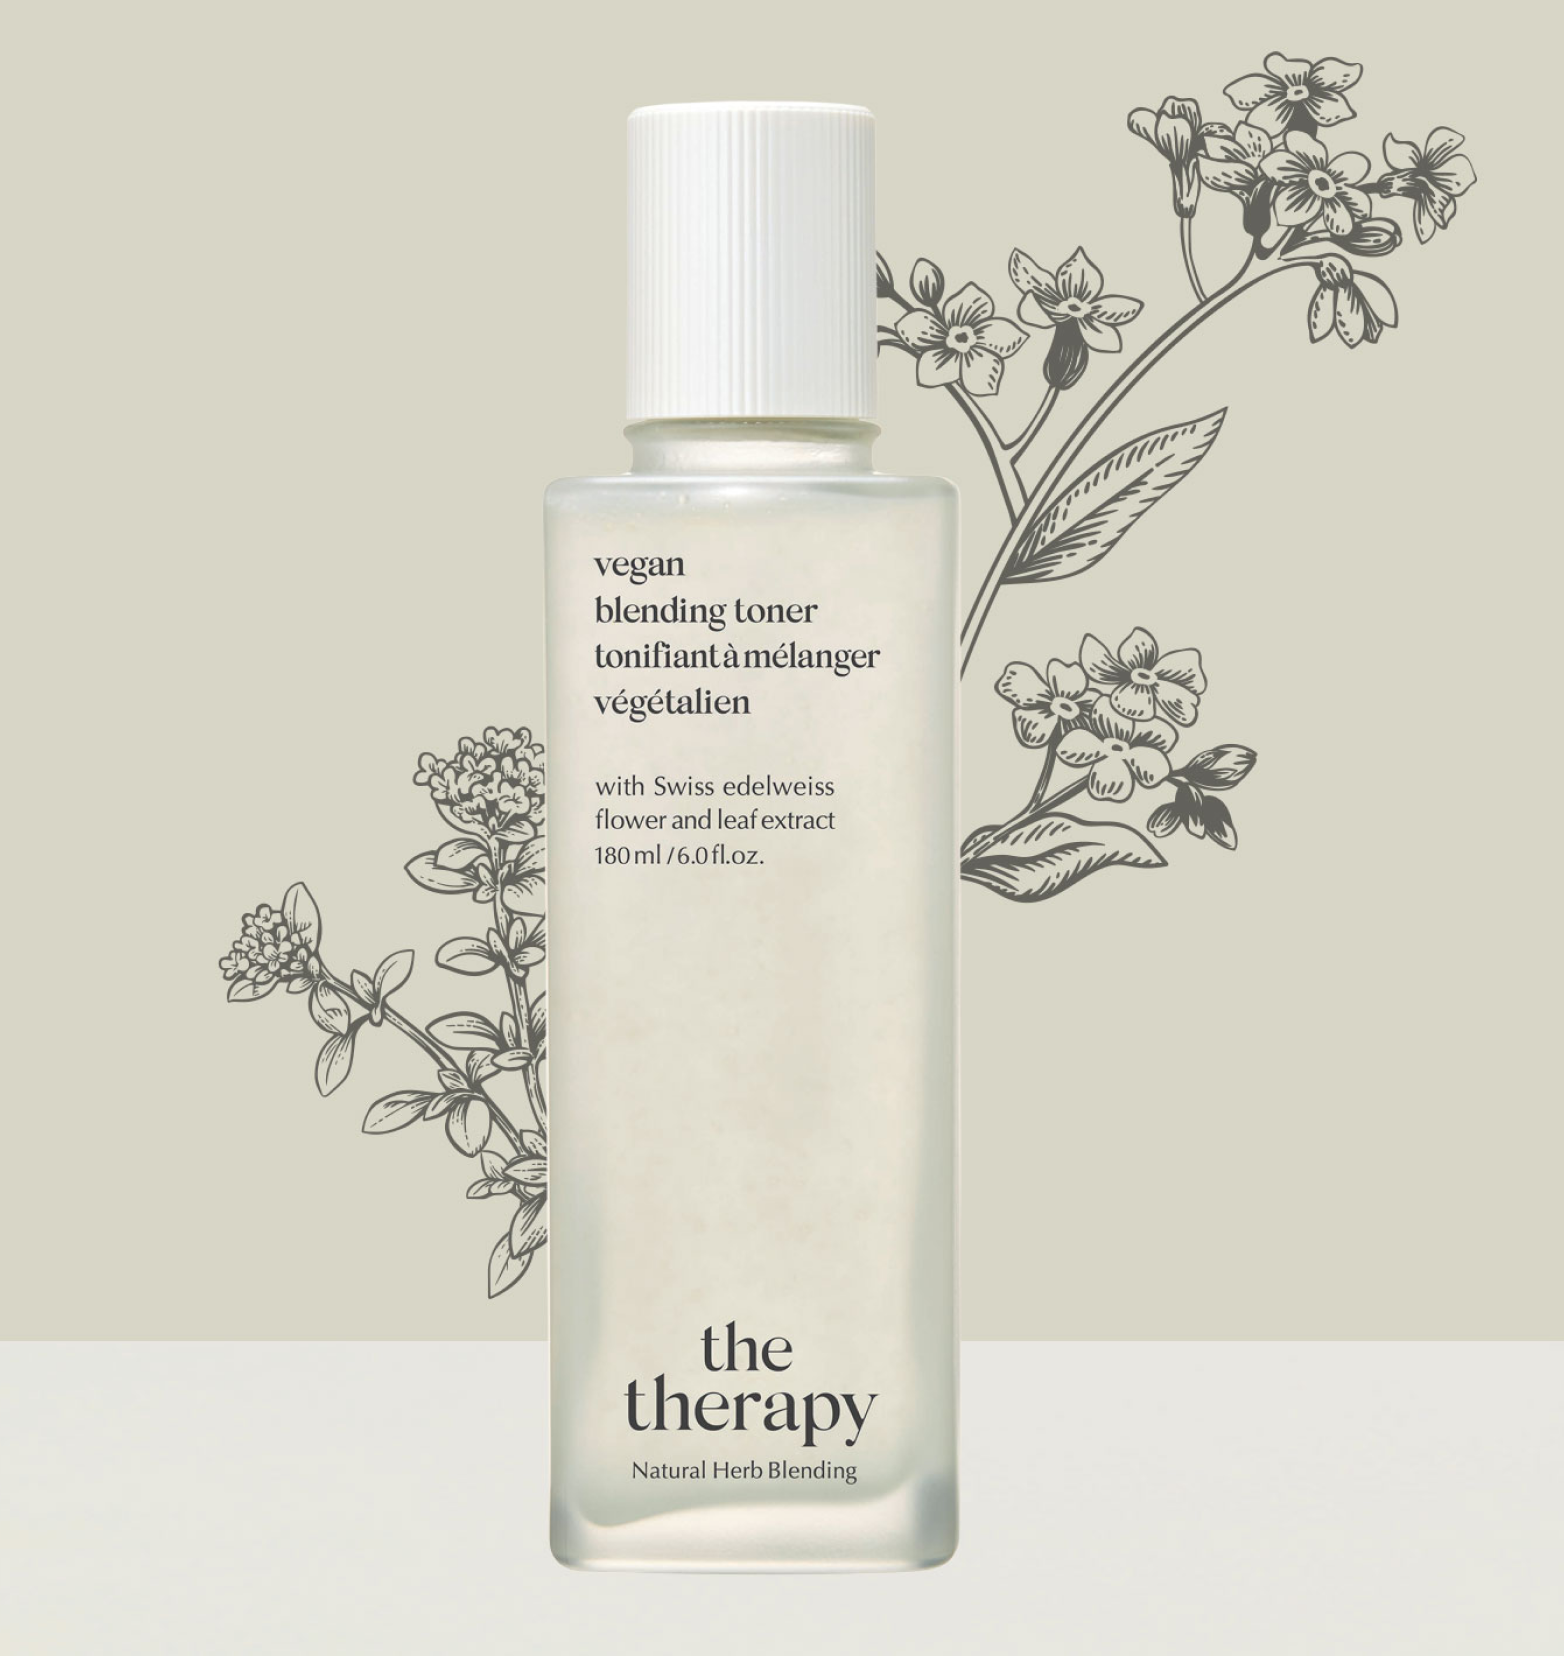 A beige bottle of The Face Shop Vegan Blending Toner standing on a beige background with a drawing of flowers